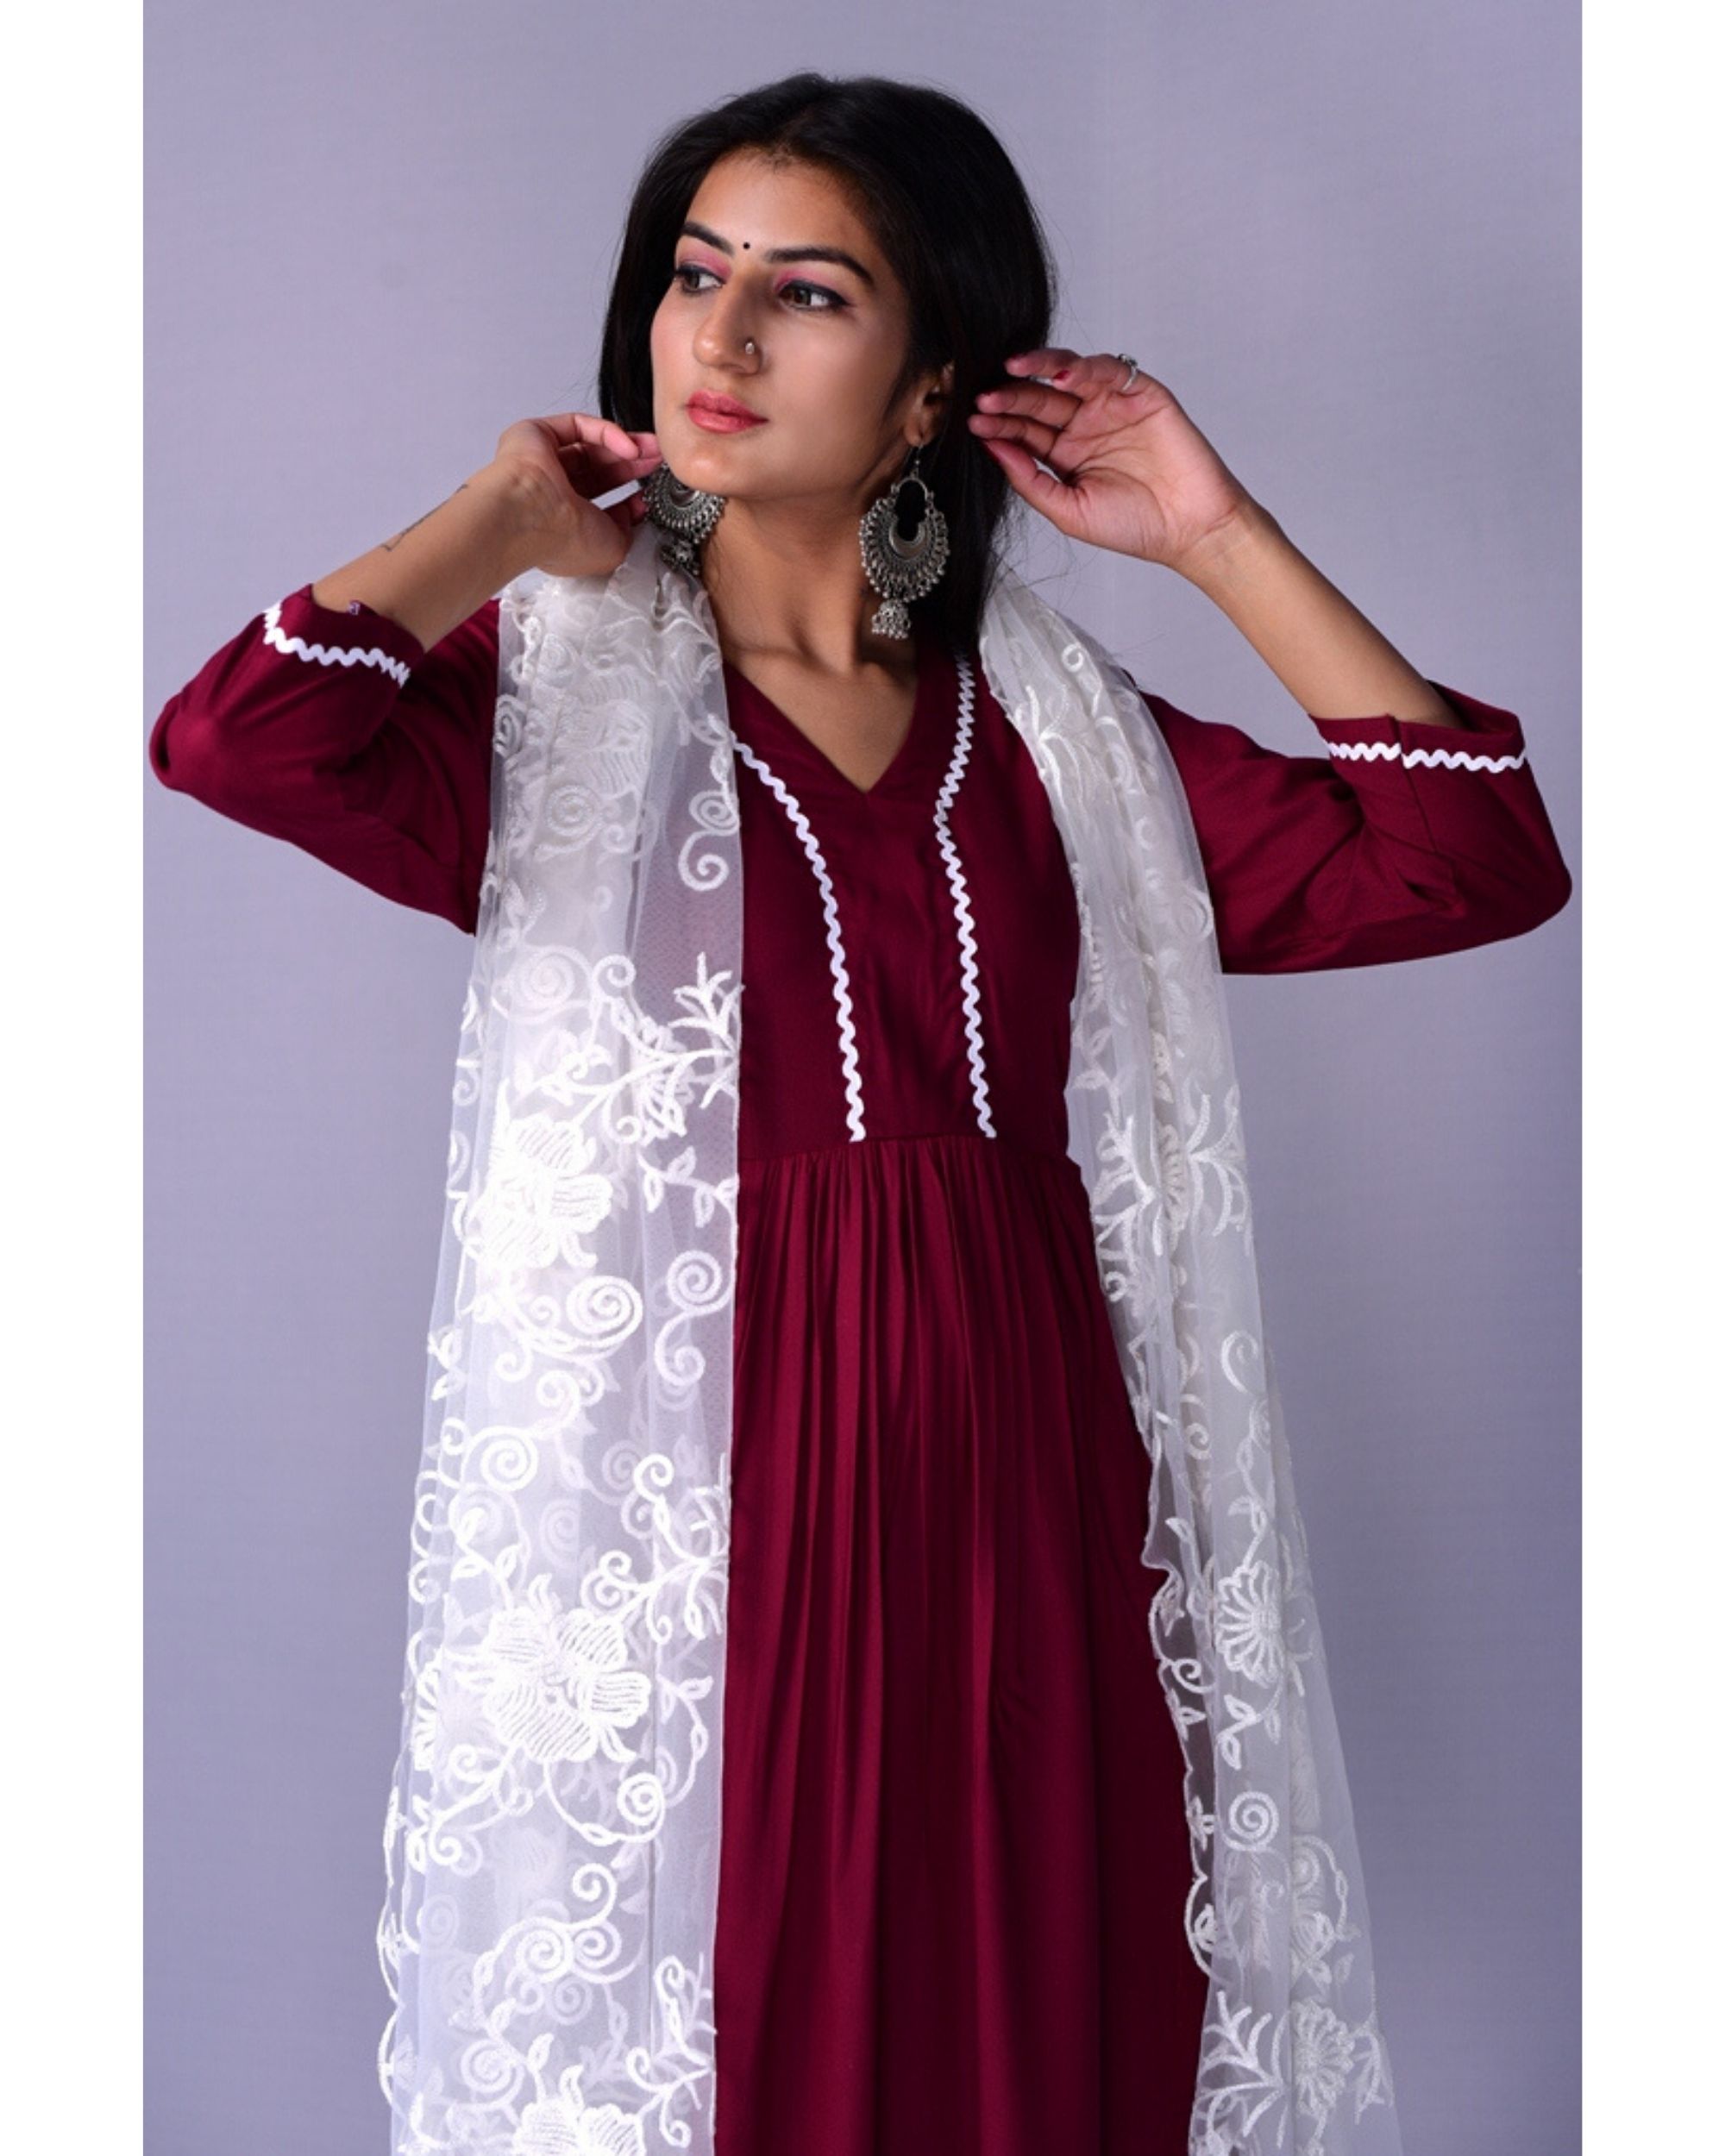 Maroon lace kurta and palazzo with embroidered dupatta- Set Of Three by  Kiswah Clothing